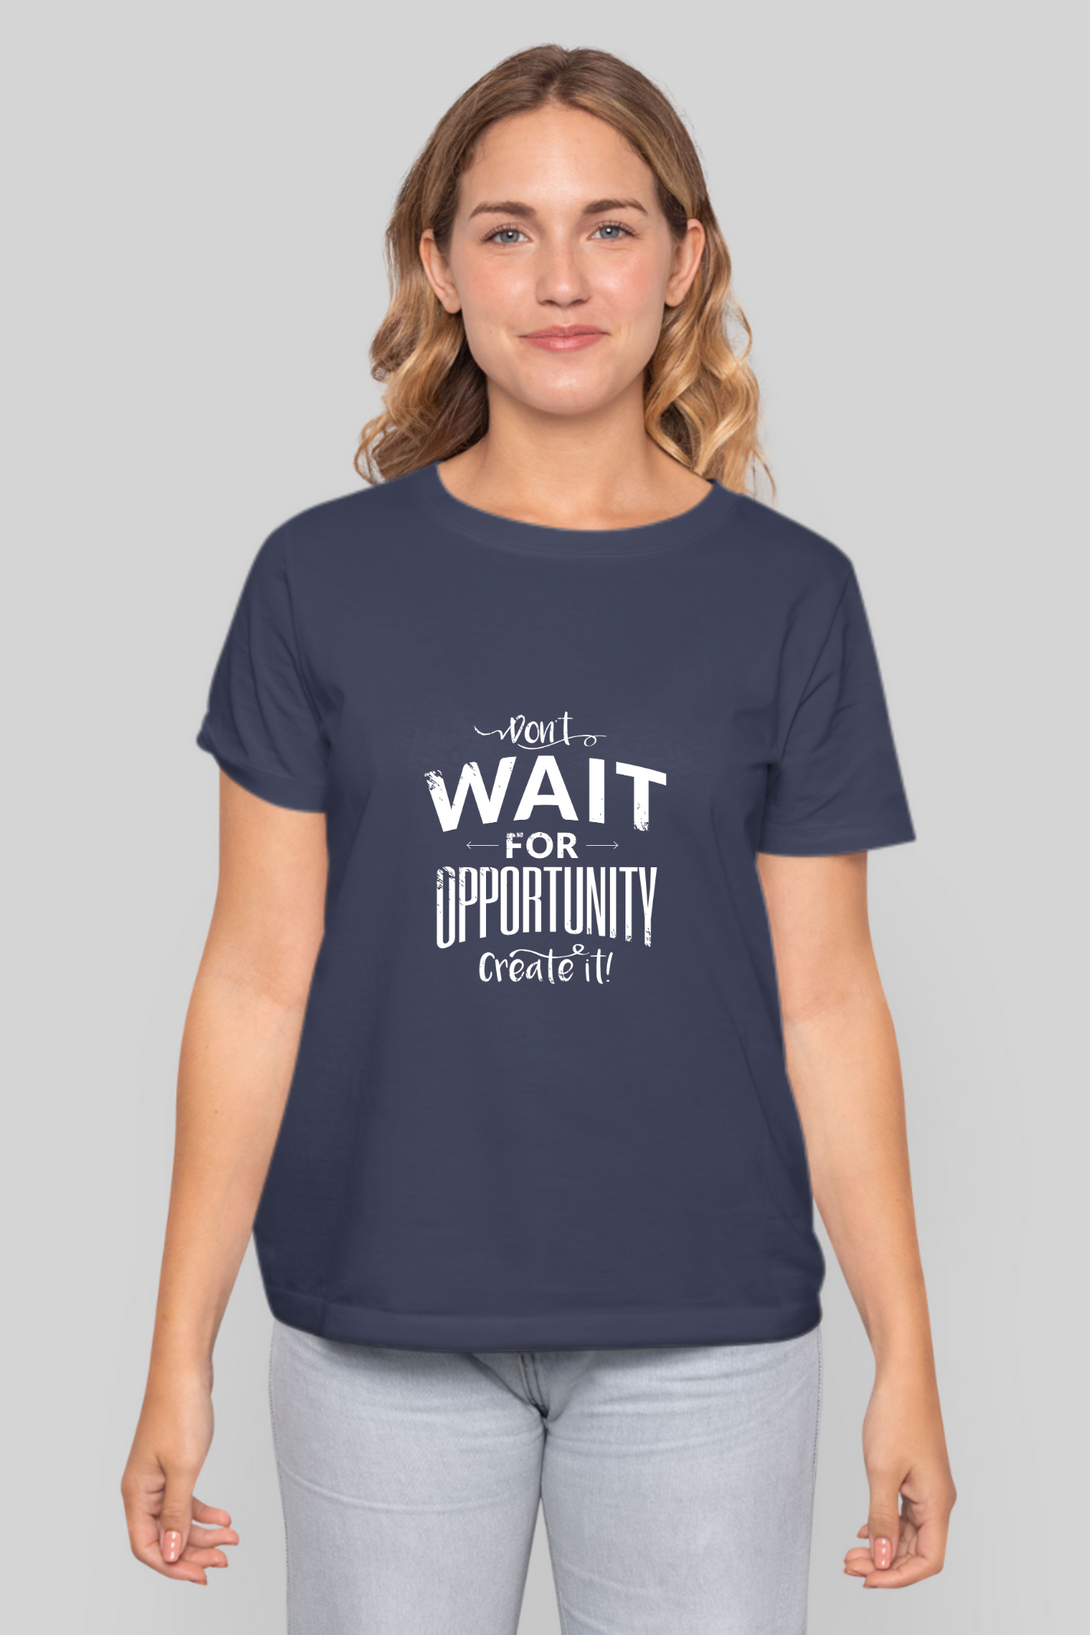 Create Opportunity Printed T-Shirt For Women - WowWaves - 11